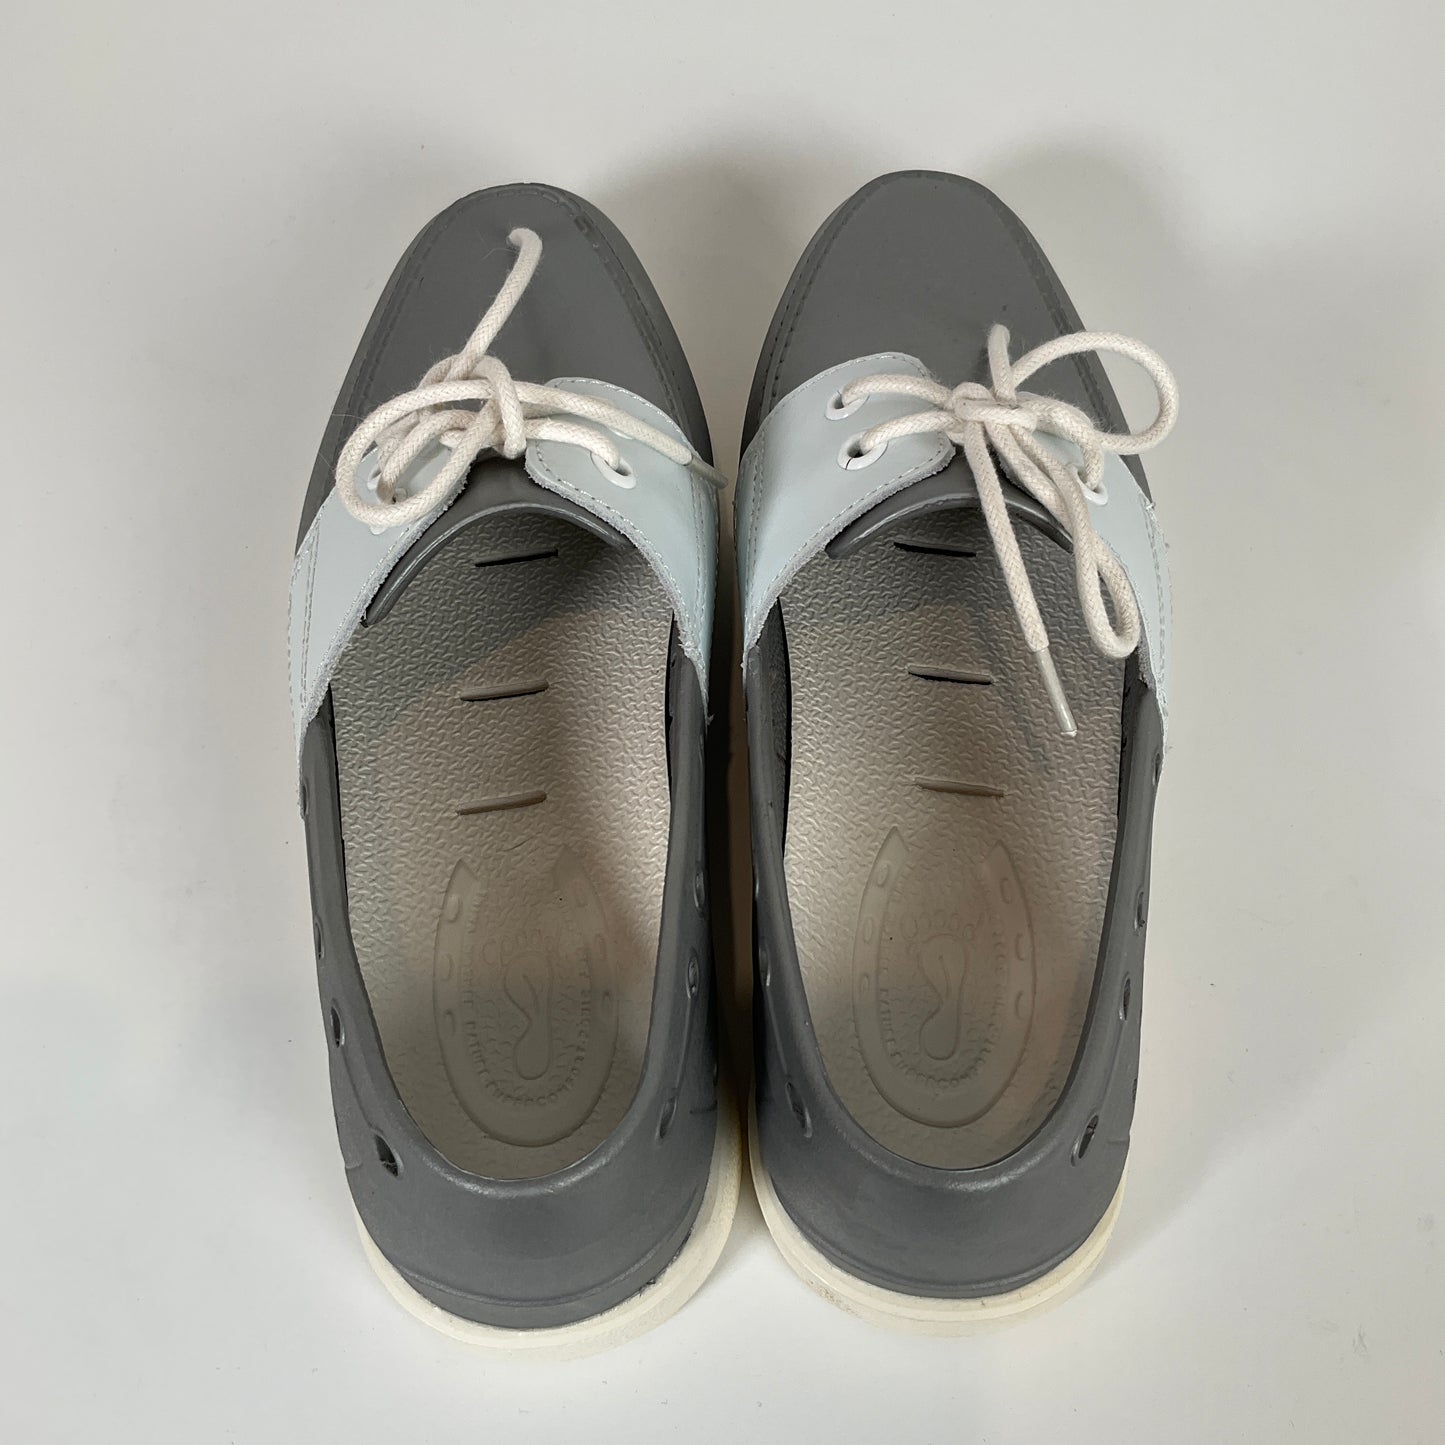 Ponic & Co - Boat Shoe - Size 7